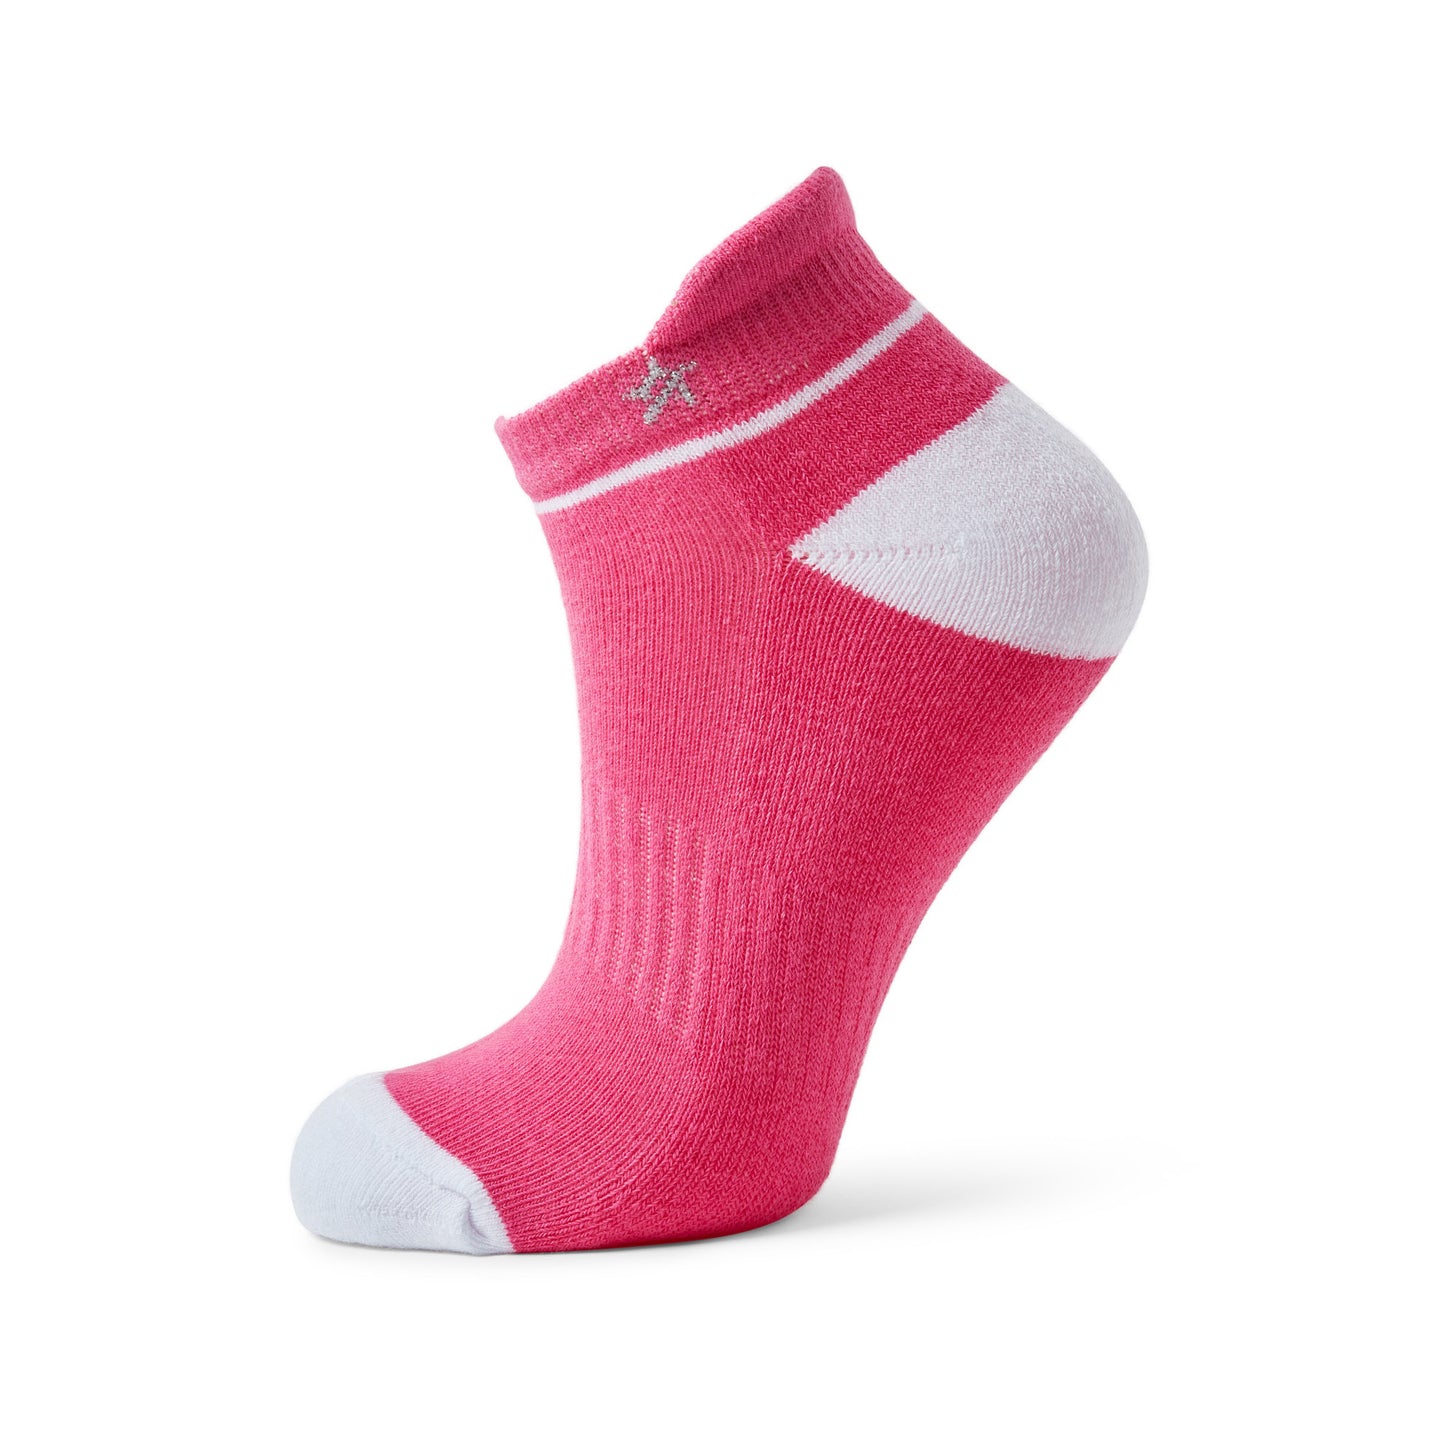 Swing Out Sister Ladies 2 Pair Cotton Socks in Lush Pink and Mandarin